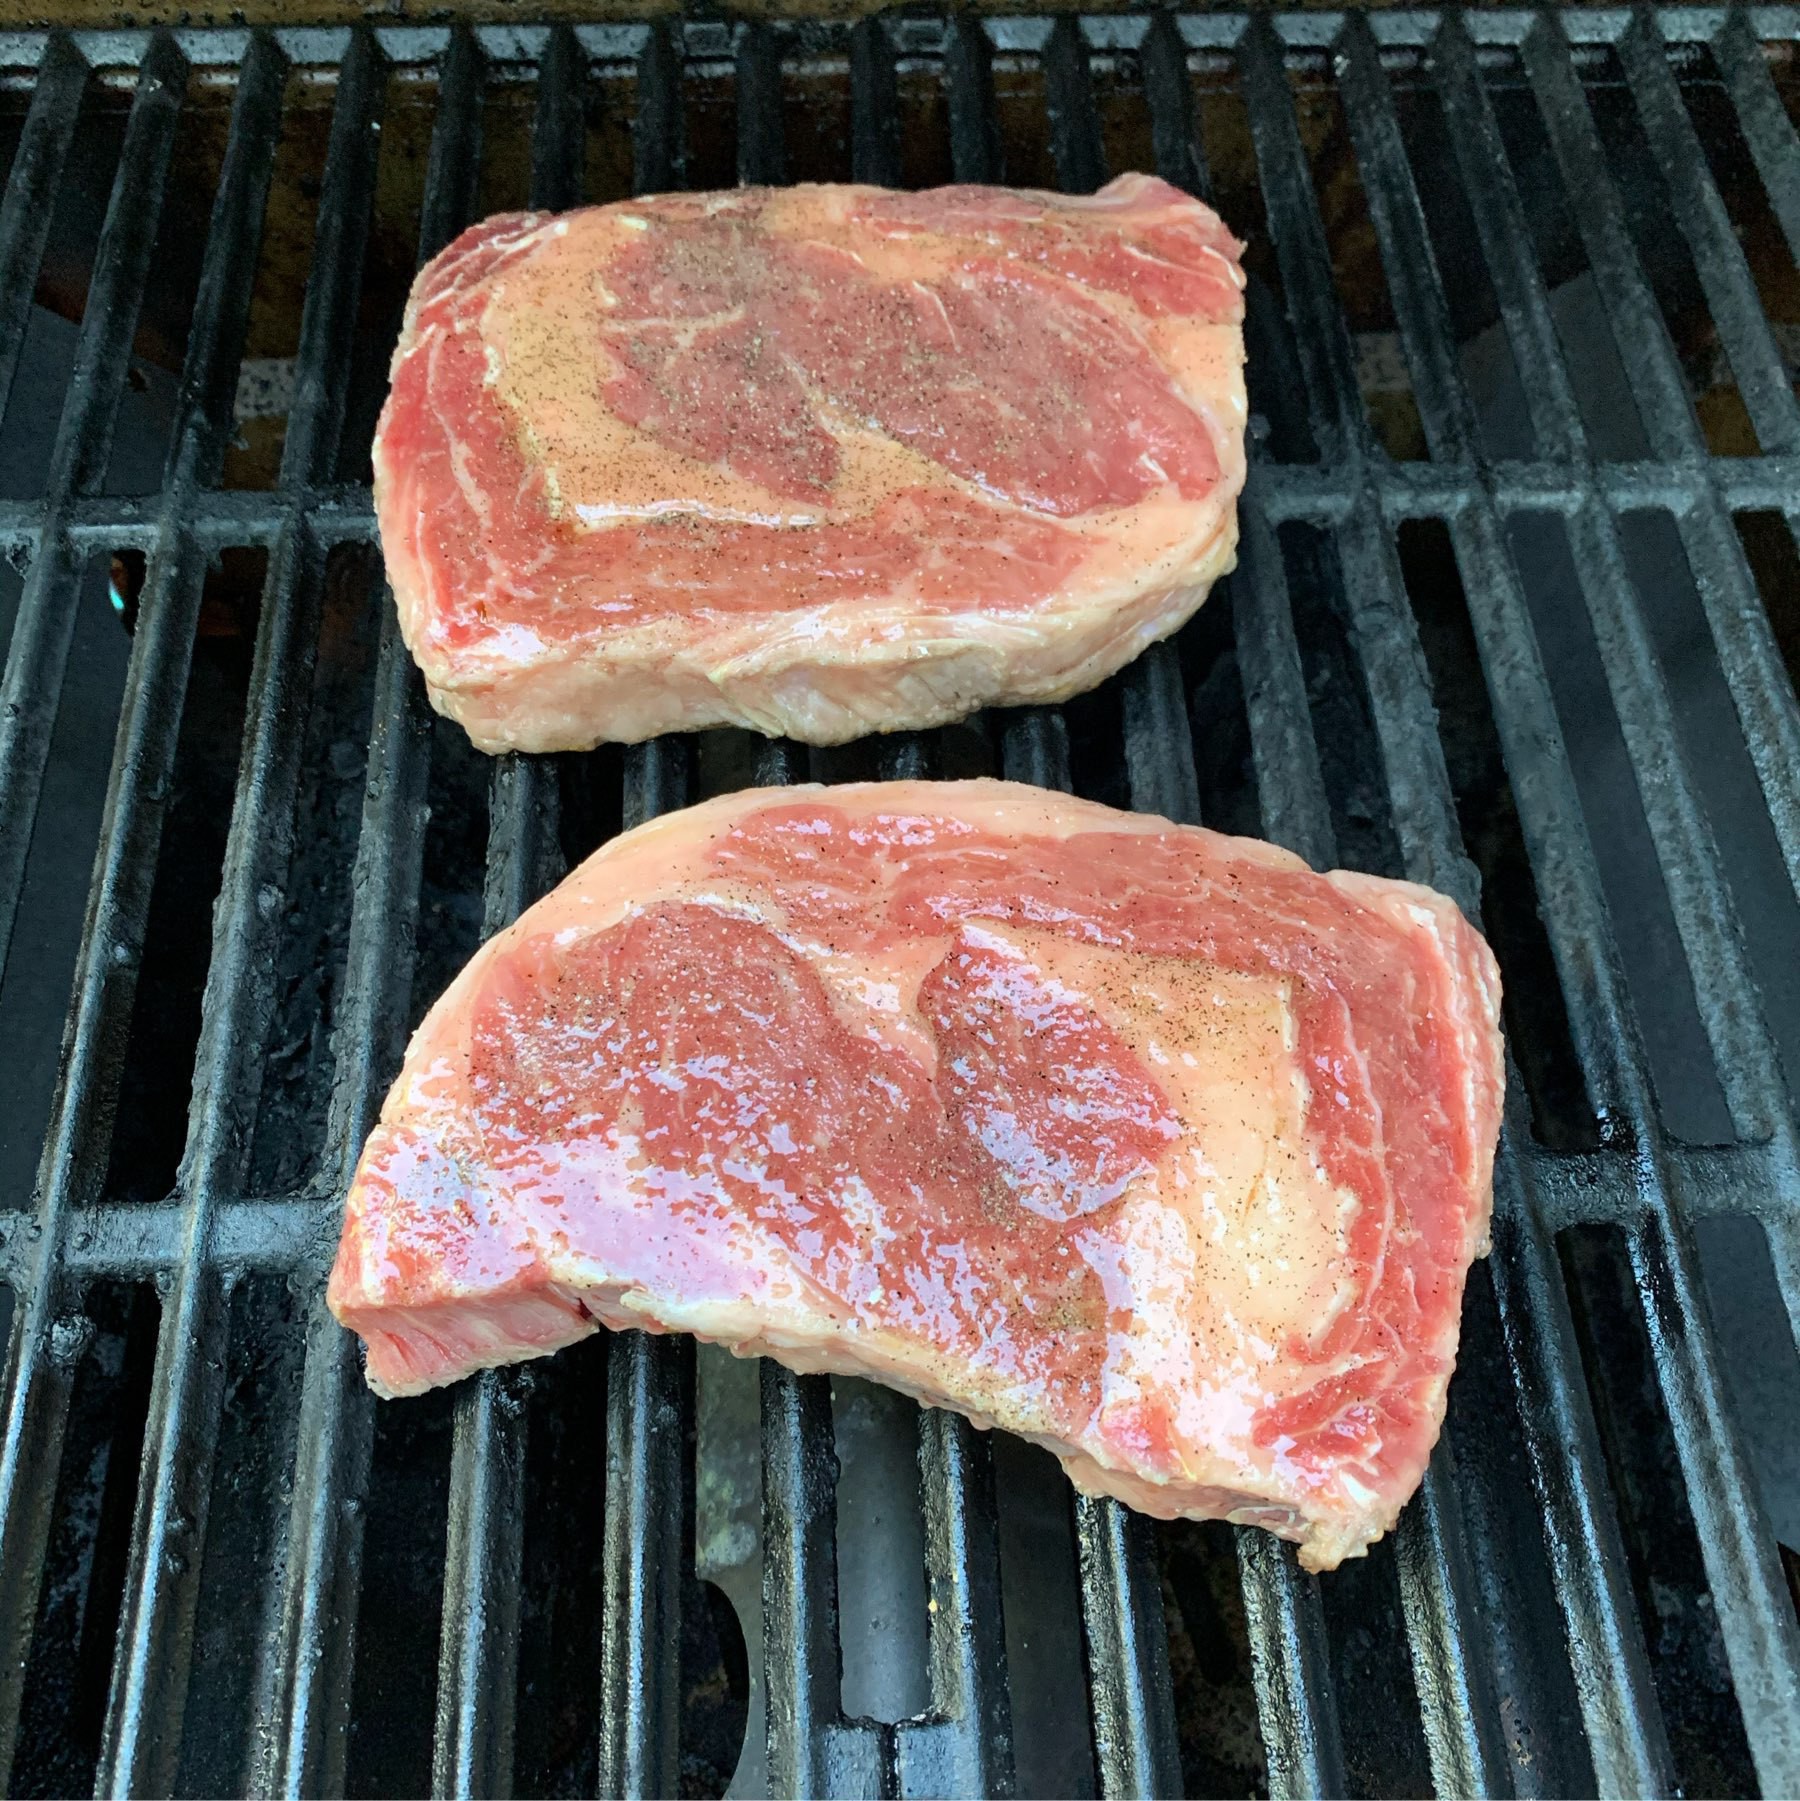 Steaks on the grill